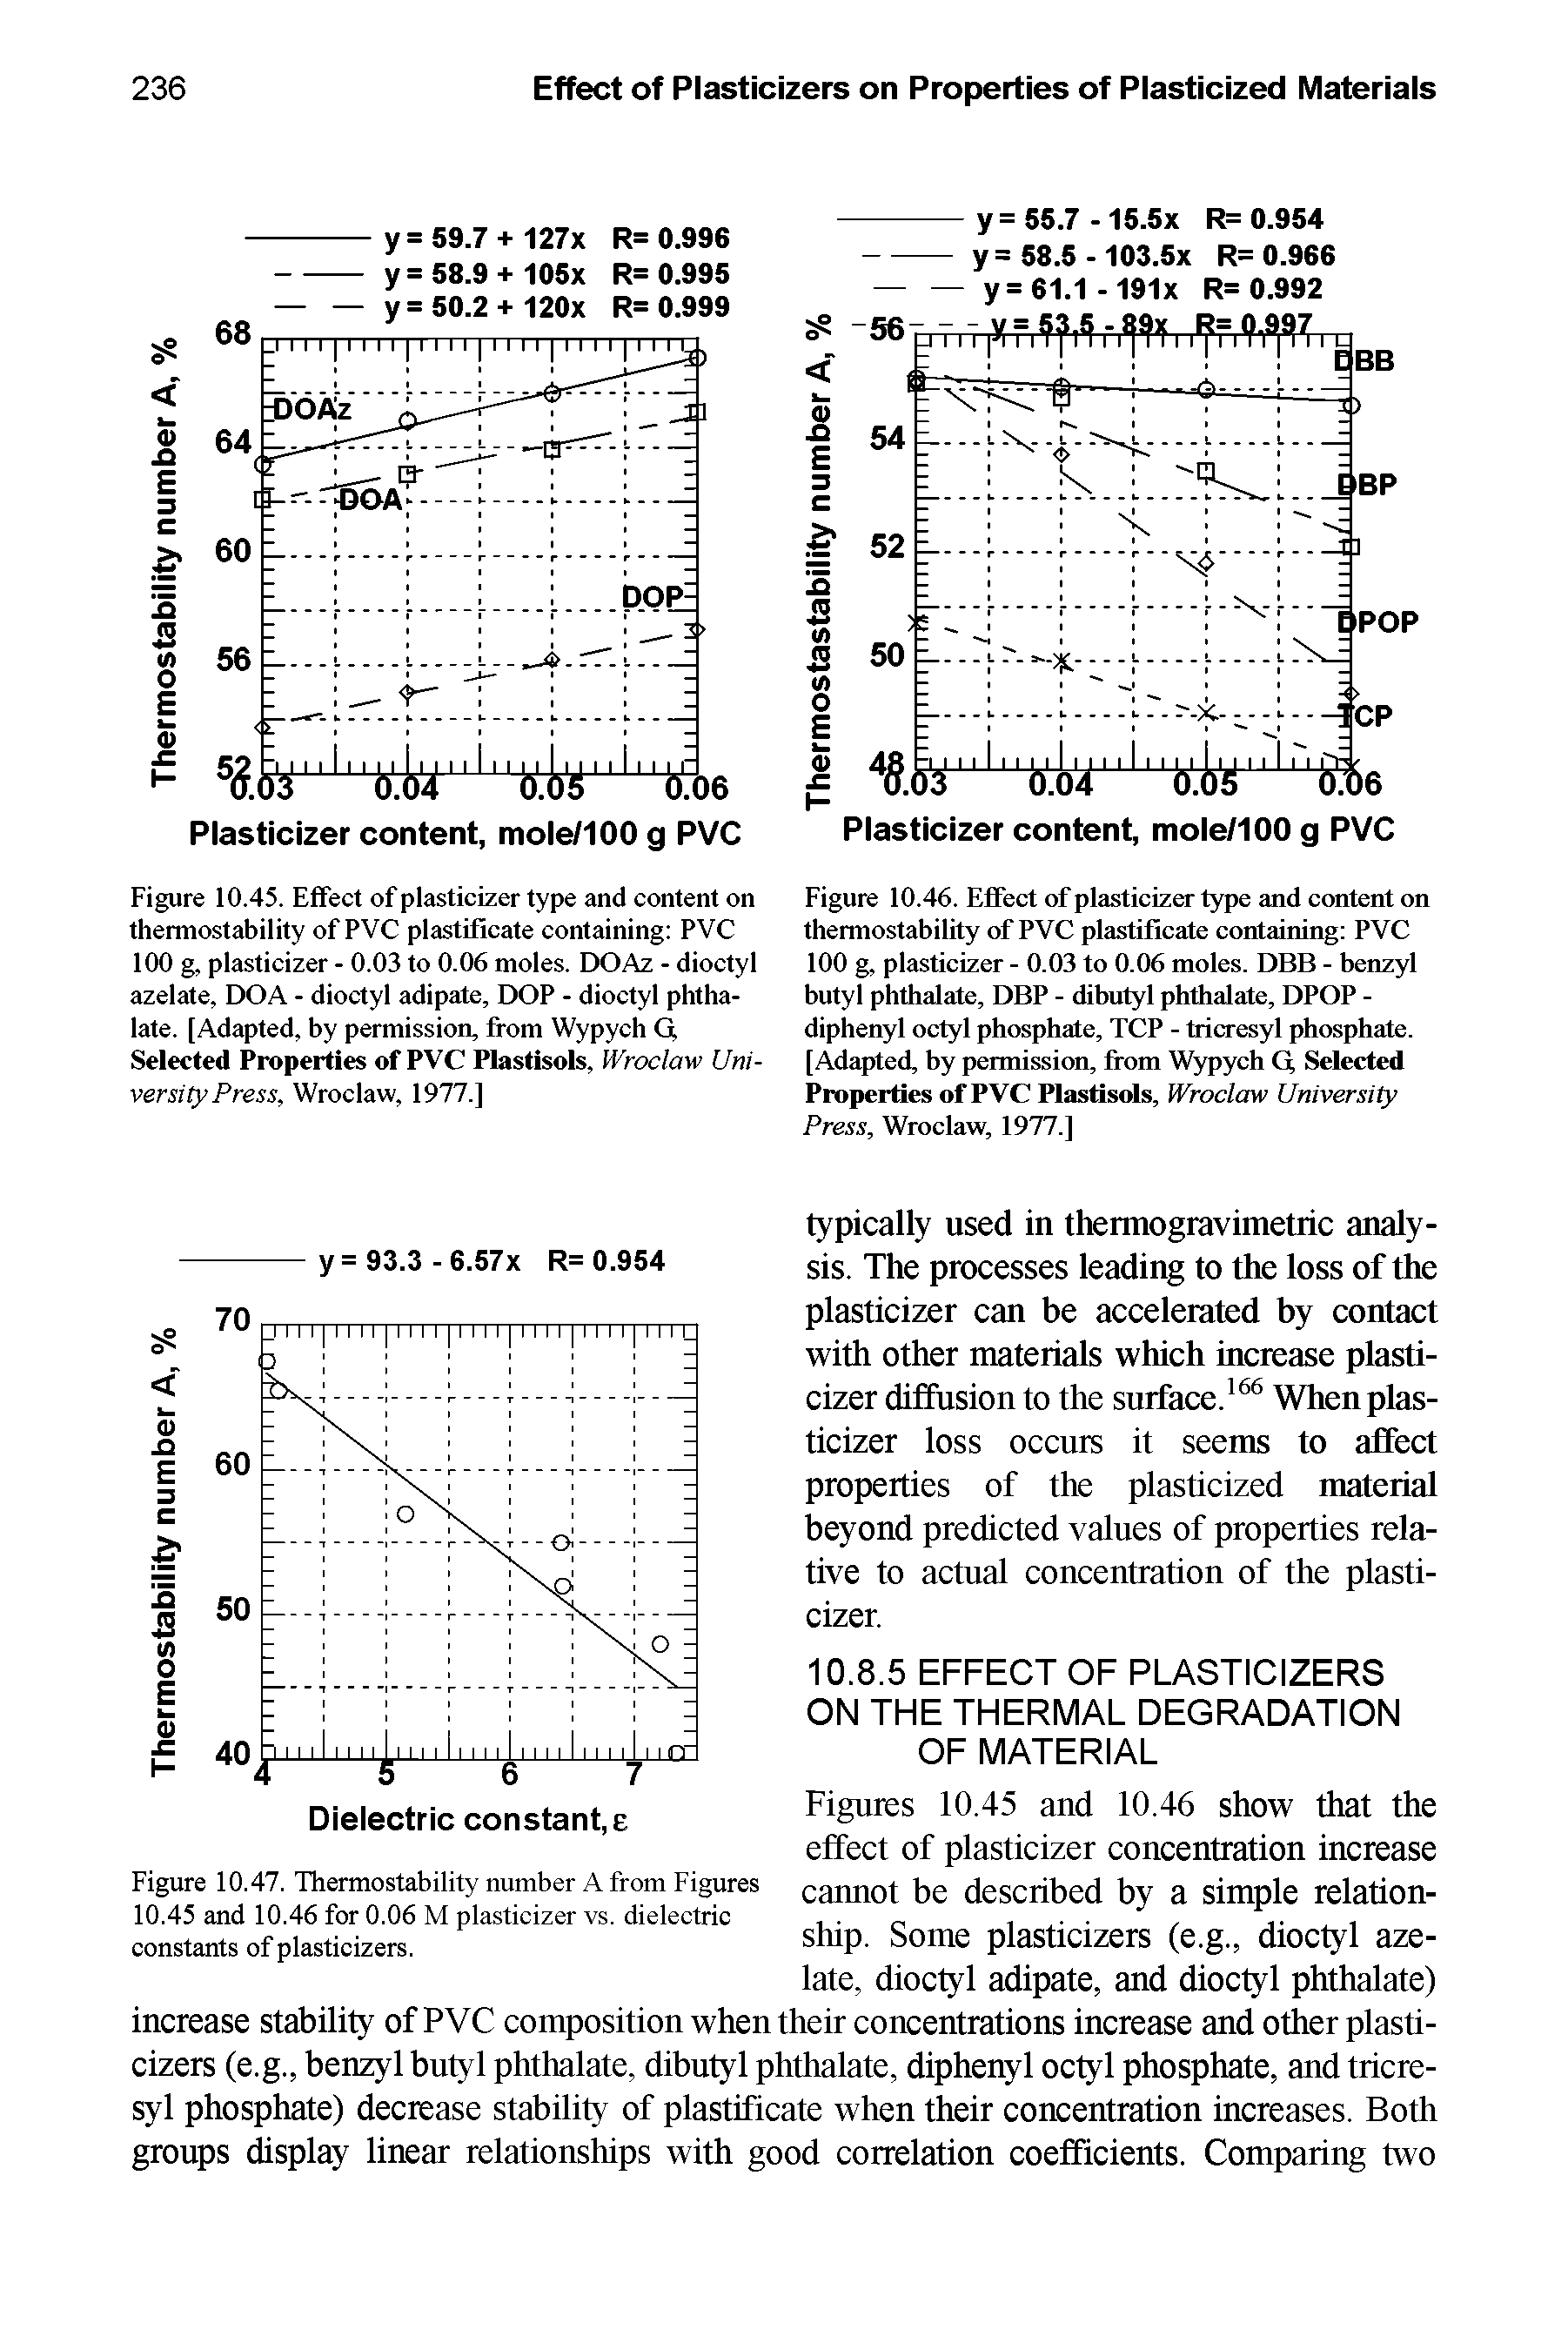 Figures 10.45 and 10.46 show that the effect of plasticizer concentration increase cannot be described by a simple relationship. Some plasticizers (e.g., dioctyl azelate, dioctyl adipate, and dioctyl phthalate) increase stability of PVC composition when their concentrations increase and other plasticizers (e.g., benzyl butyl phthalate, dibutyl phthalate, diphenyl octyl phosphate, and tricre-syl phosphate) decrease stability of plastificate when their concentration increases. Both groups display linear relationships with good correlation coefficients. Comparing two...